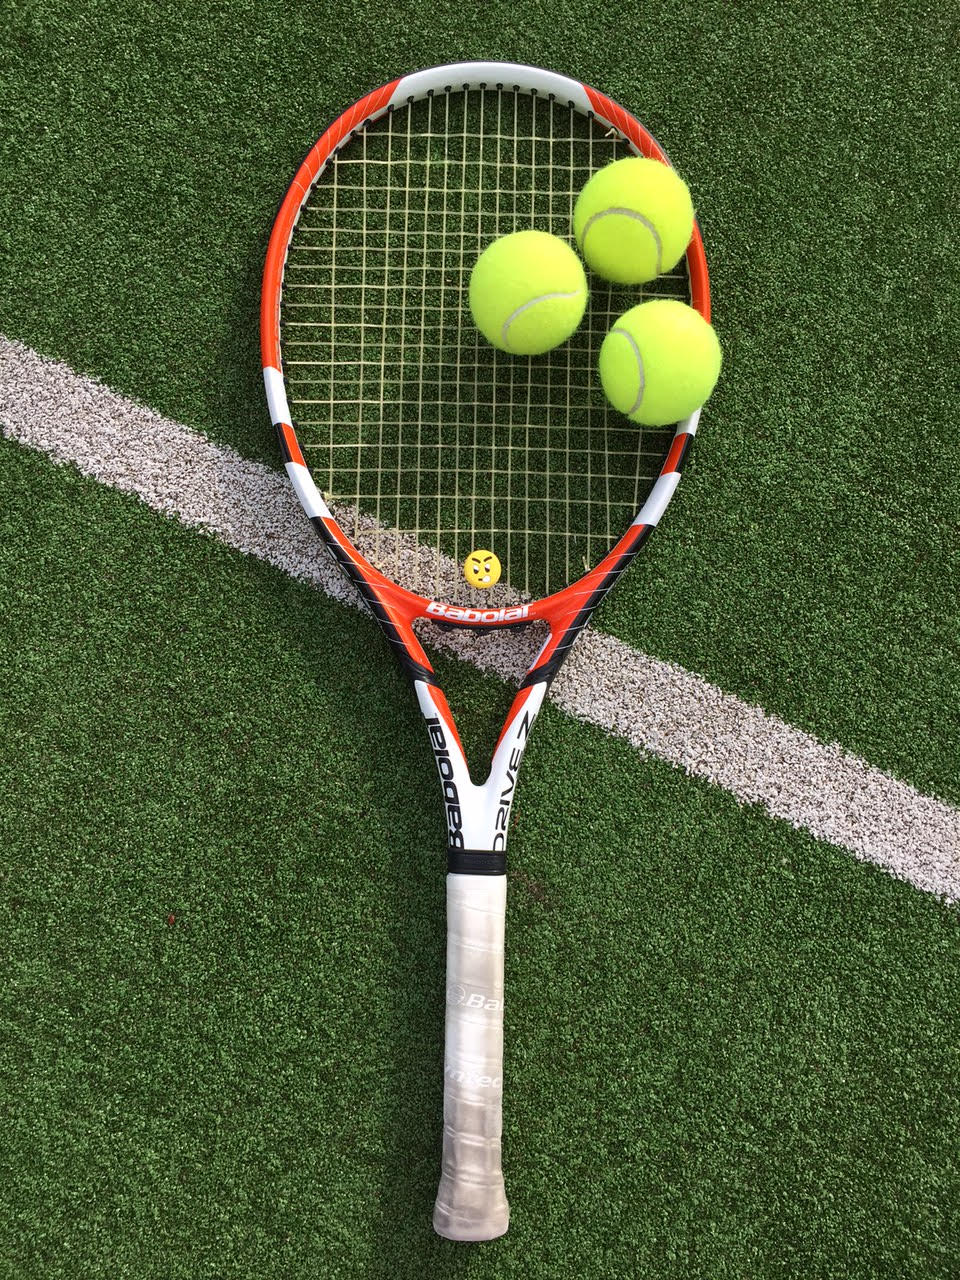 Anyone for Tennis? — Office Worker Health